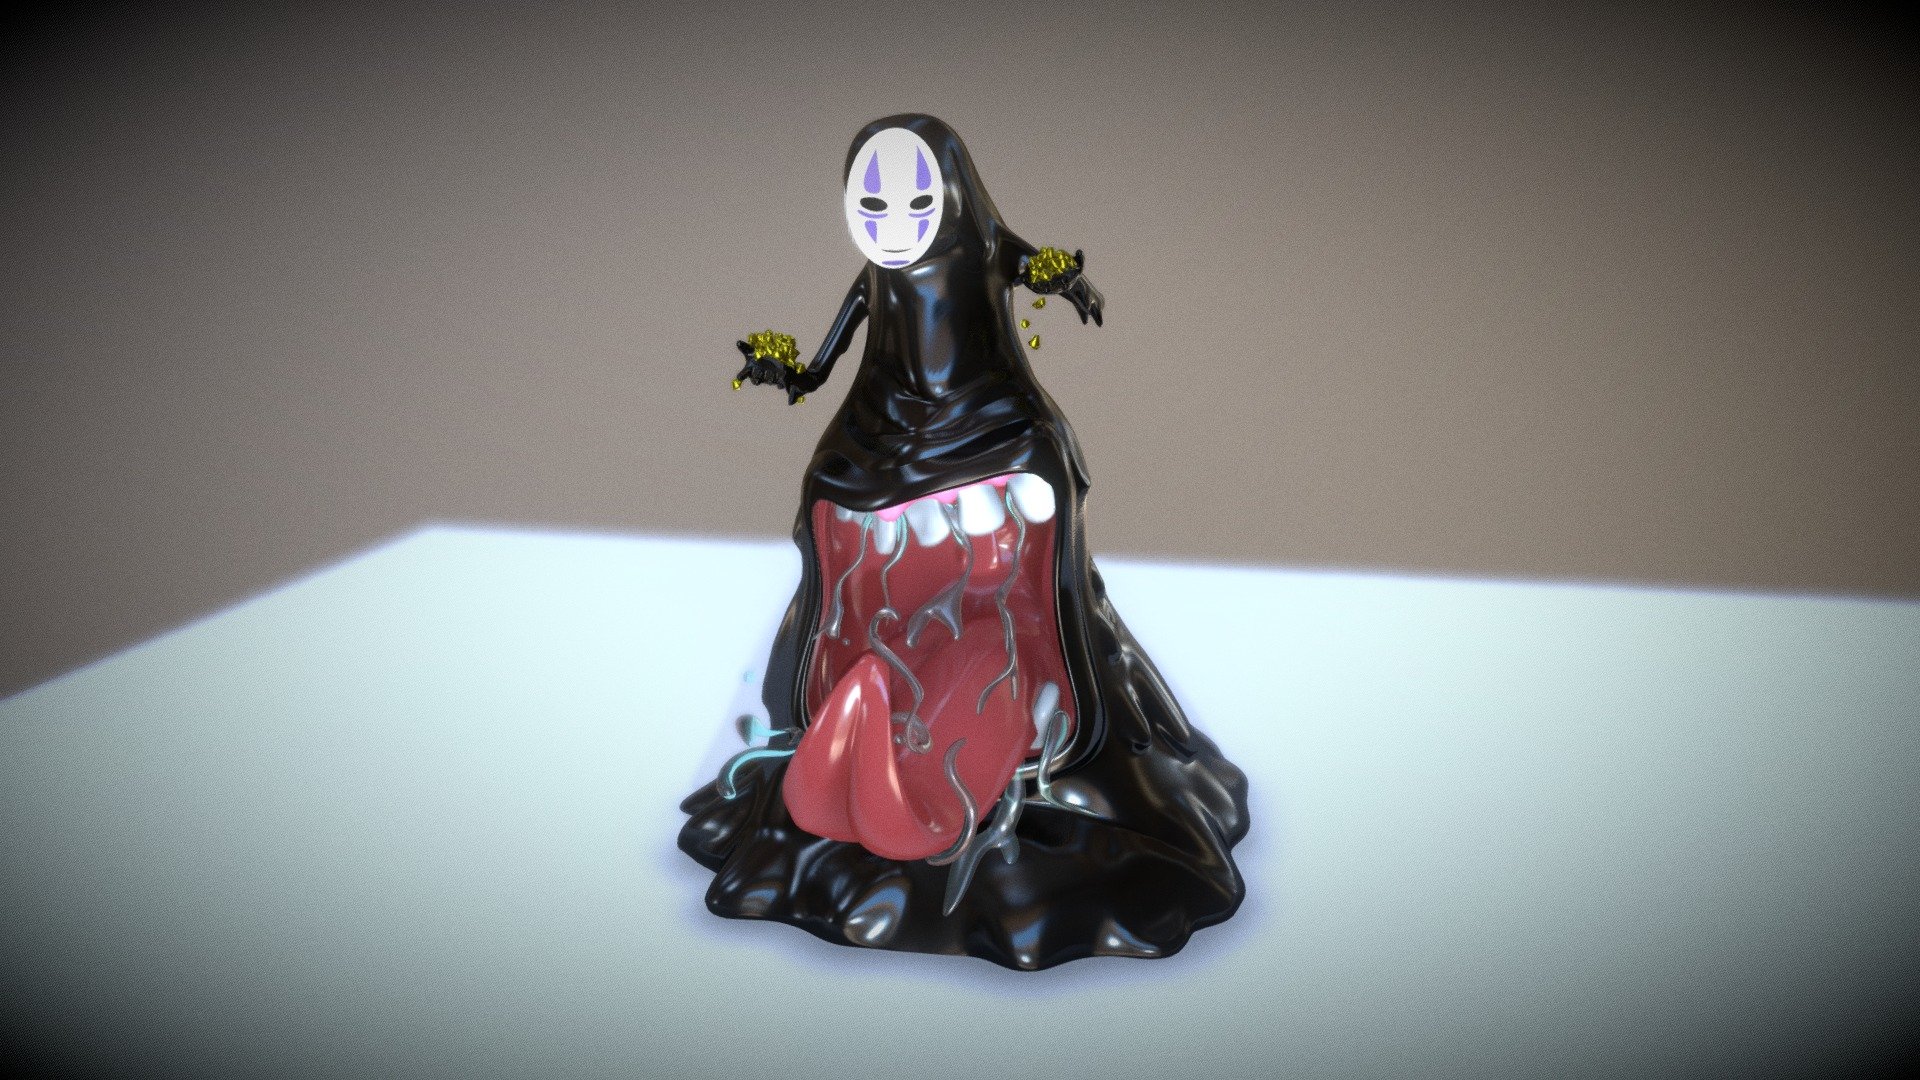 Miyazaki's No Face character from Spirited Away.

All done in Blender 3d model